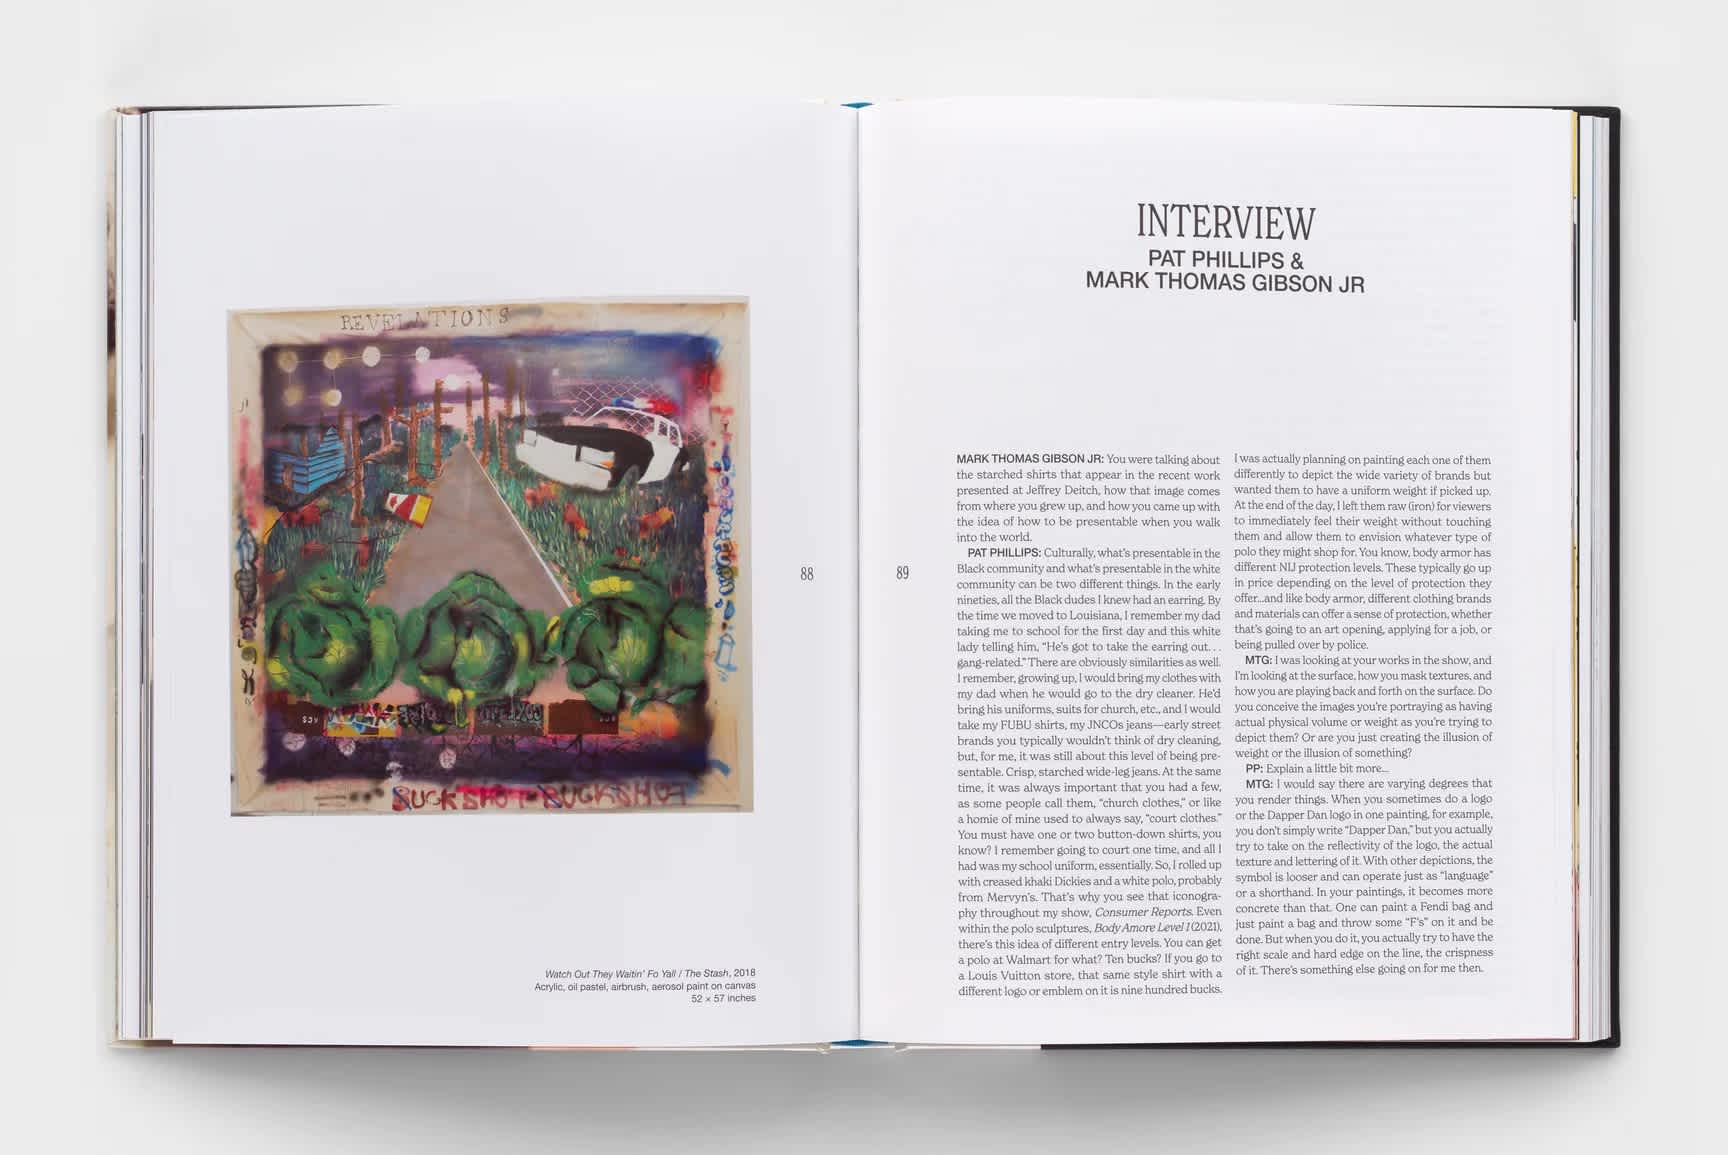 Book interior that features a painting on the left page and an interview on the right page.